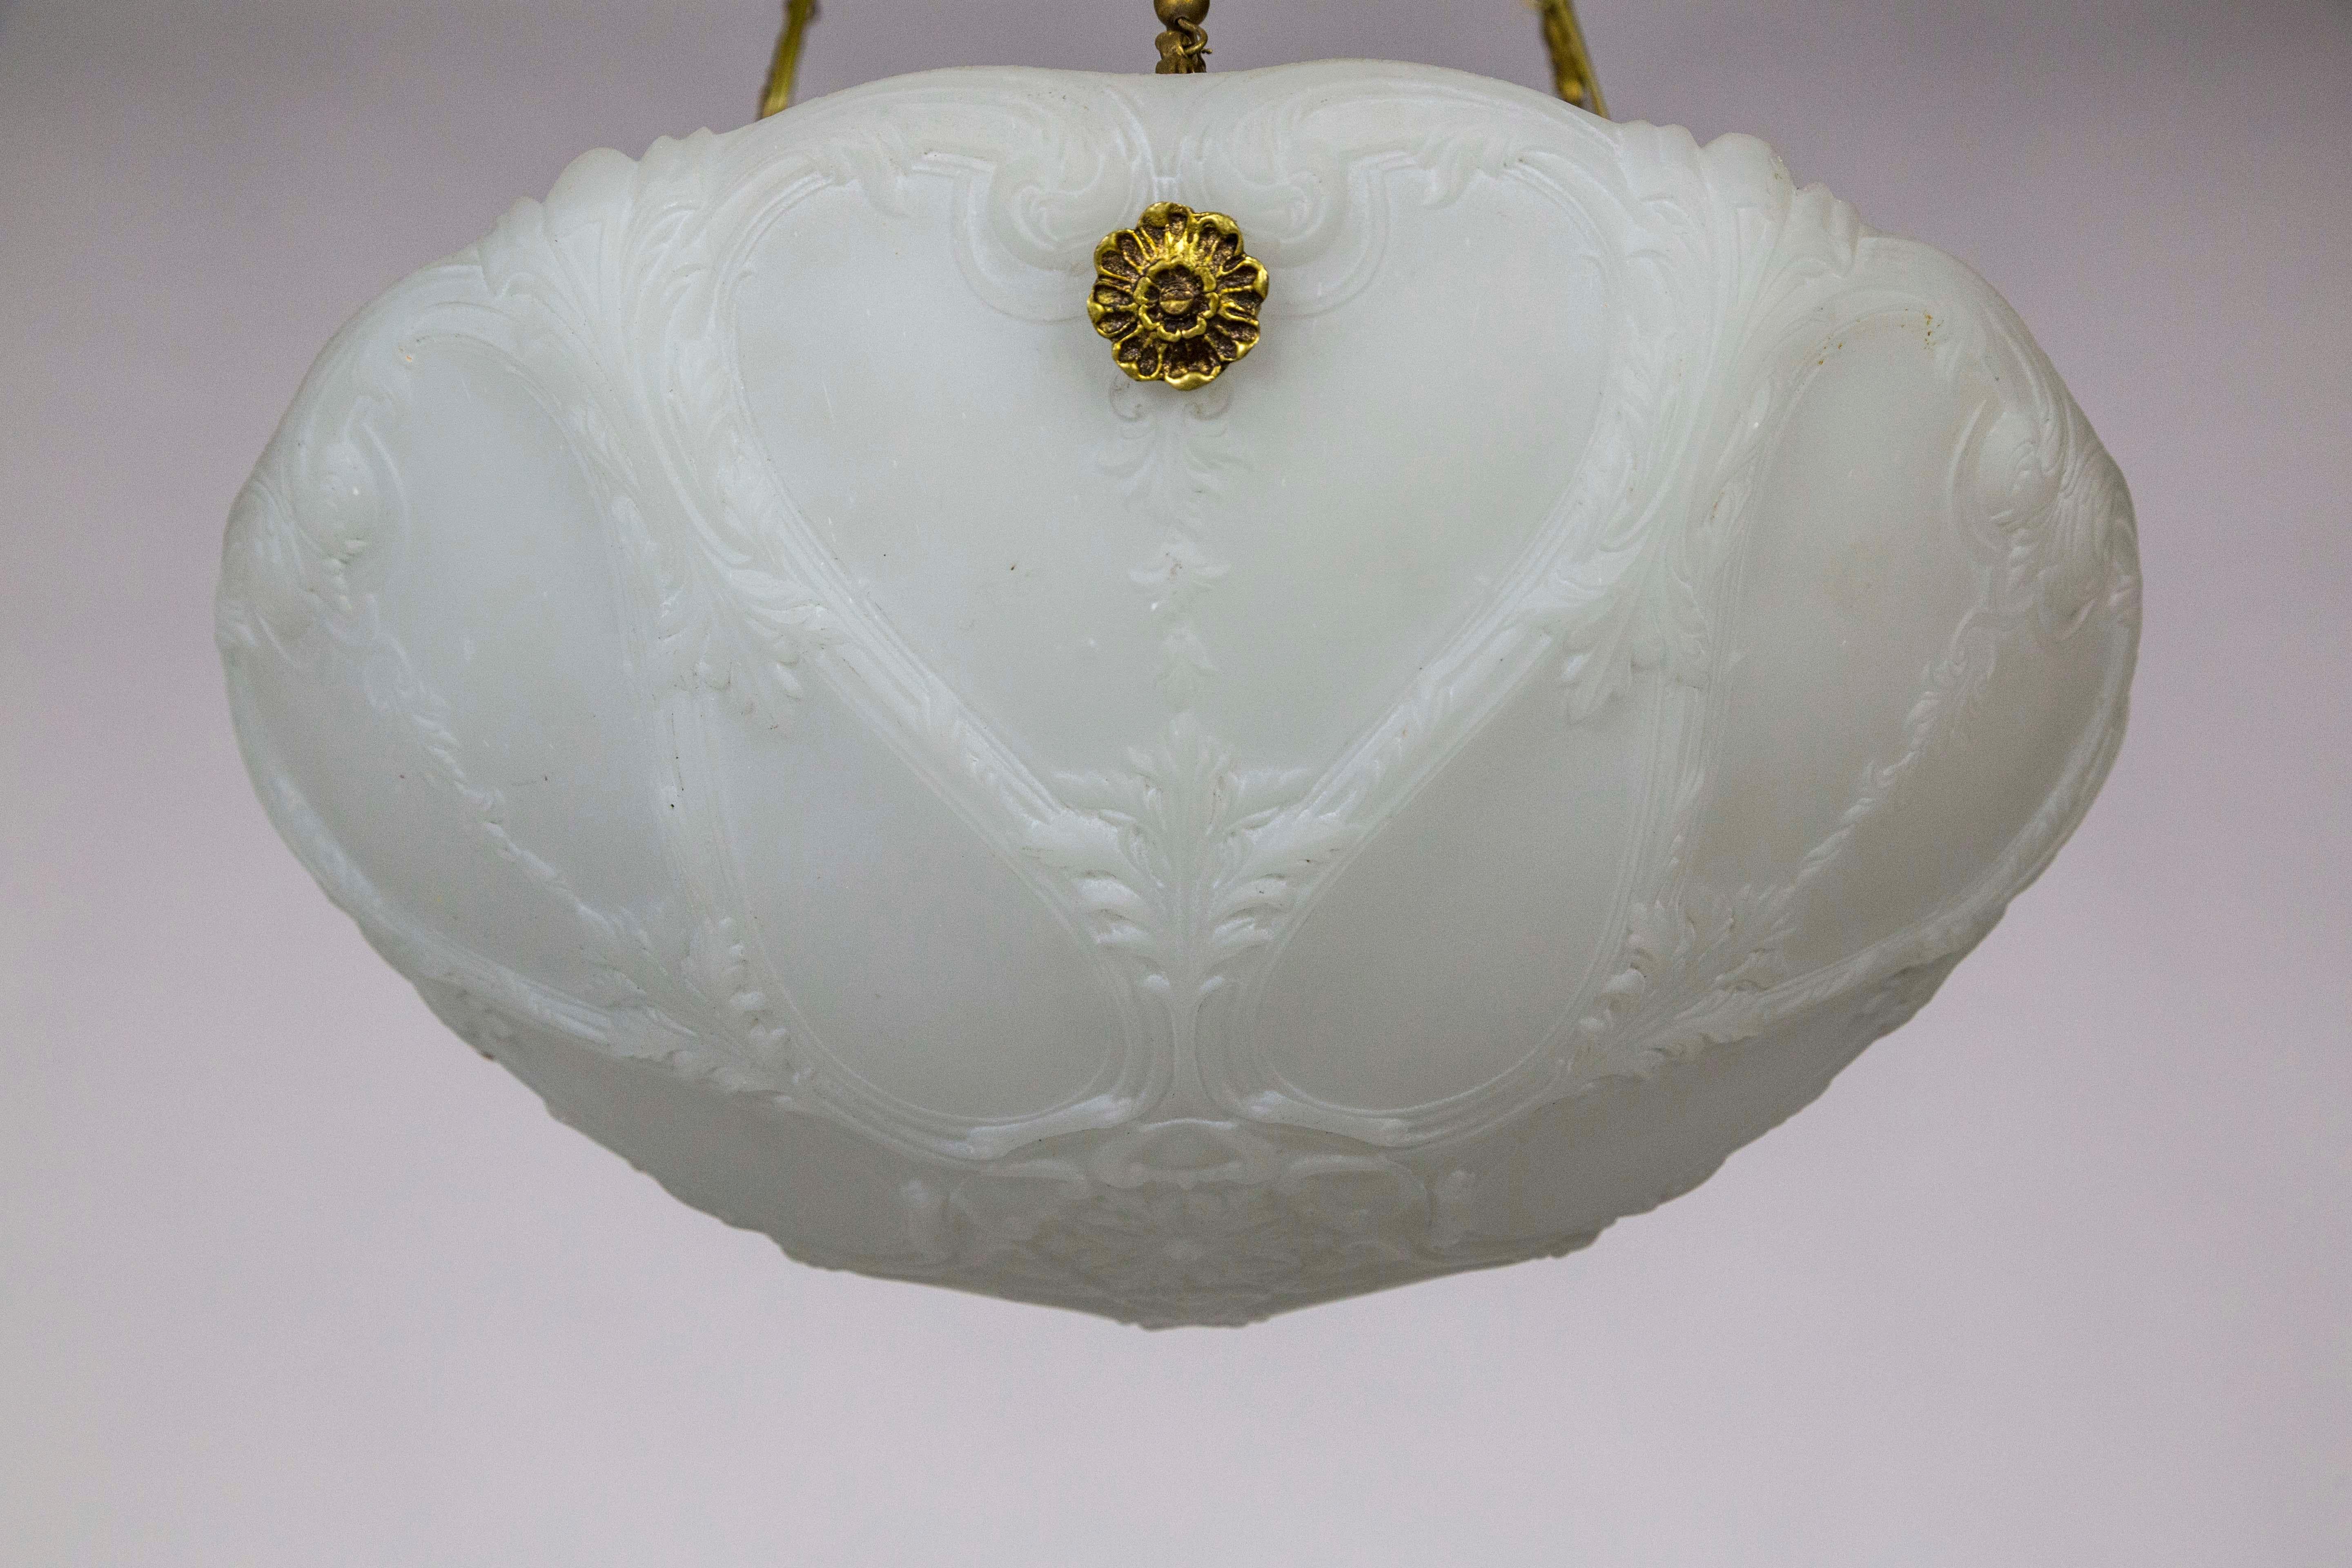 Early 1900s Neoclassical Detailed Milk Glass Bowl Pendant Light W/ Unique Chain In Good Condition For Sale In San Francisco, CA